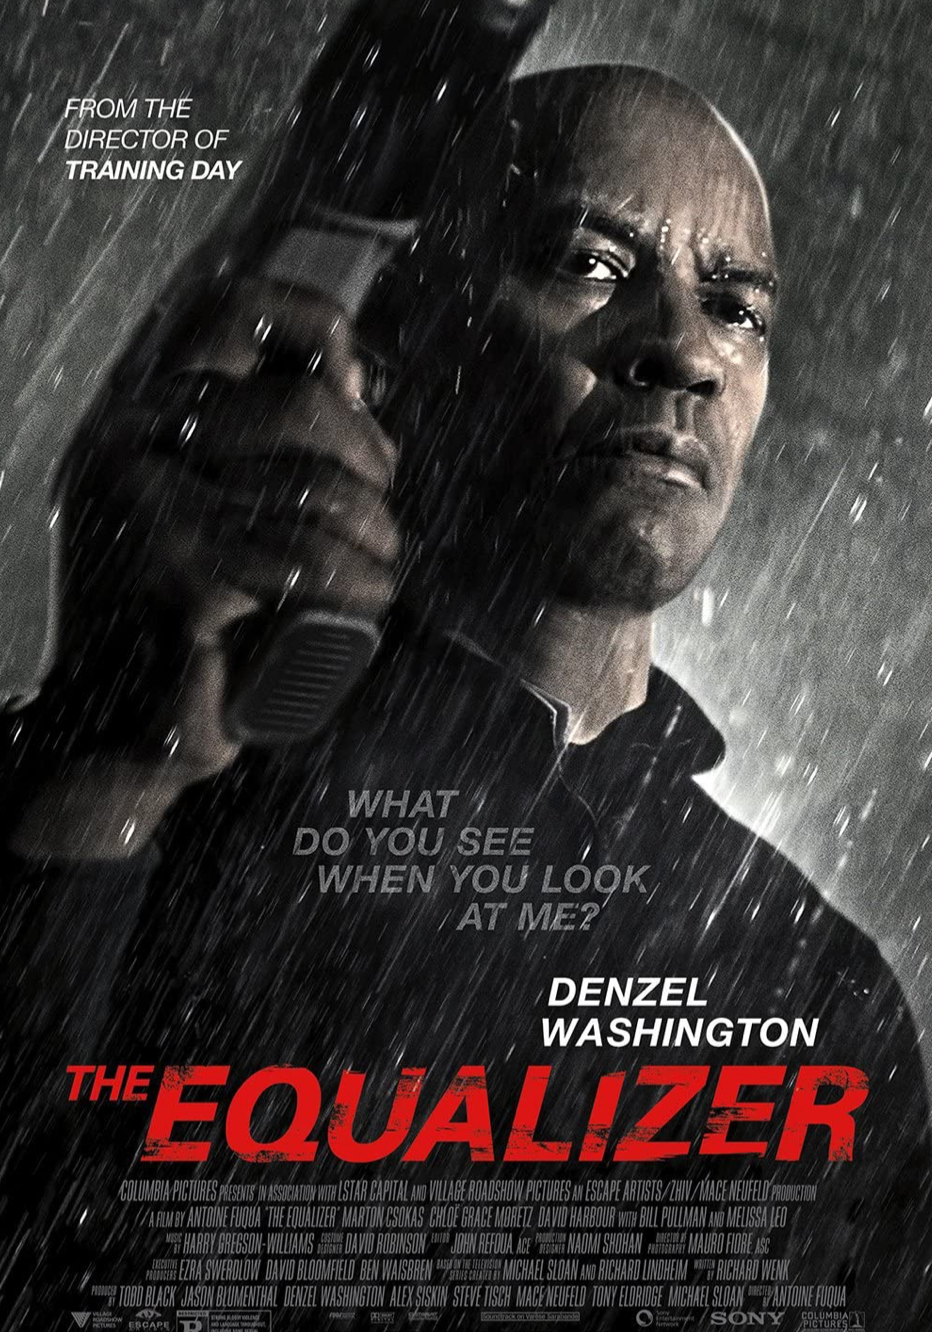 https://cinemadailyus.com/wp-content/uploads/2022/01/The-Equalizer.png